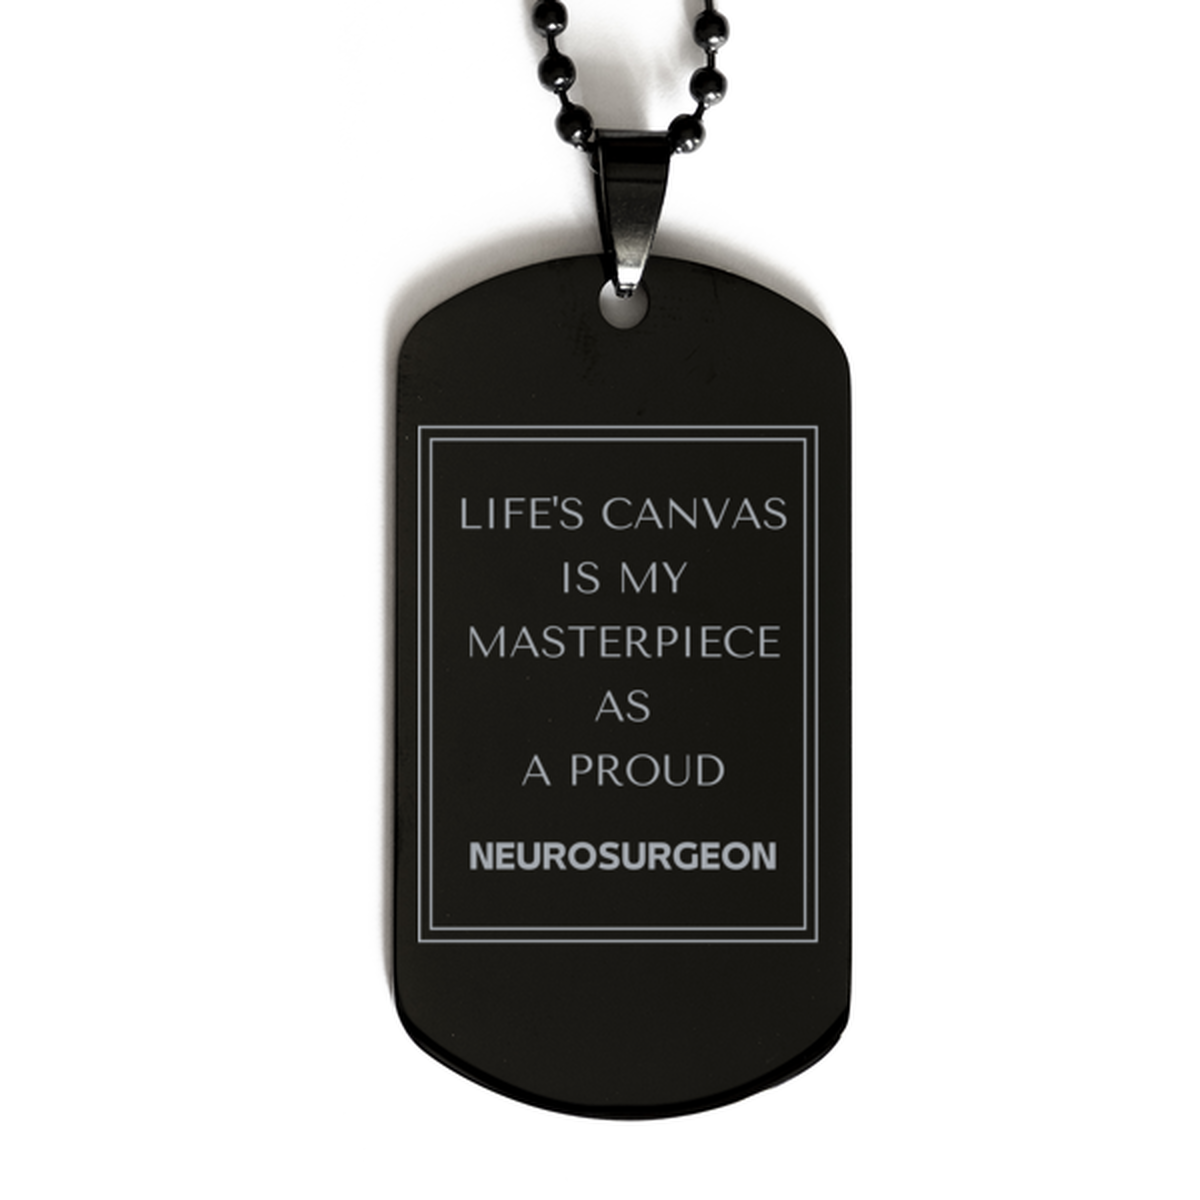 Proud Neurosurgeon Gifts, Life's canvas is my masterpiece, Epic Birthday Christmas Unique Black Dog Tag For Neurosurgeon, Coworkers, Men, Women, Friends